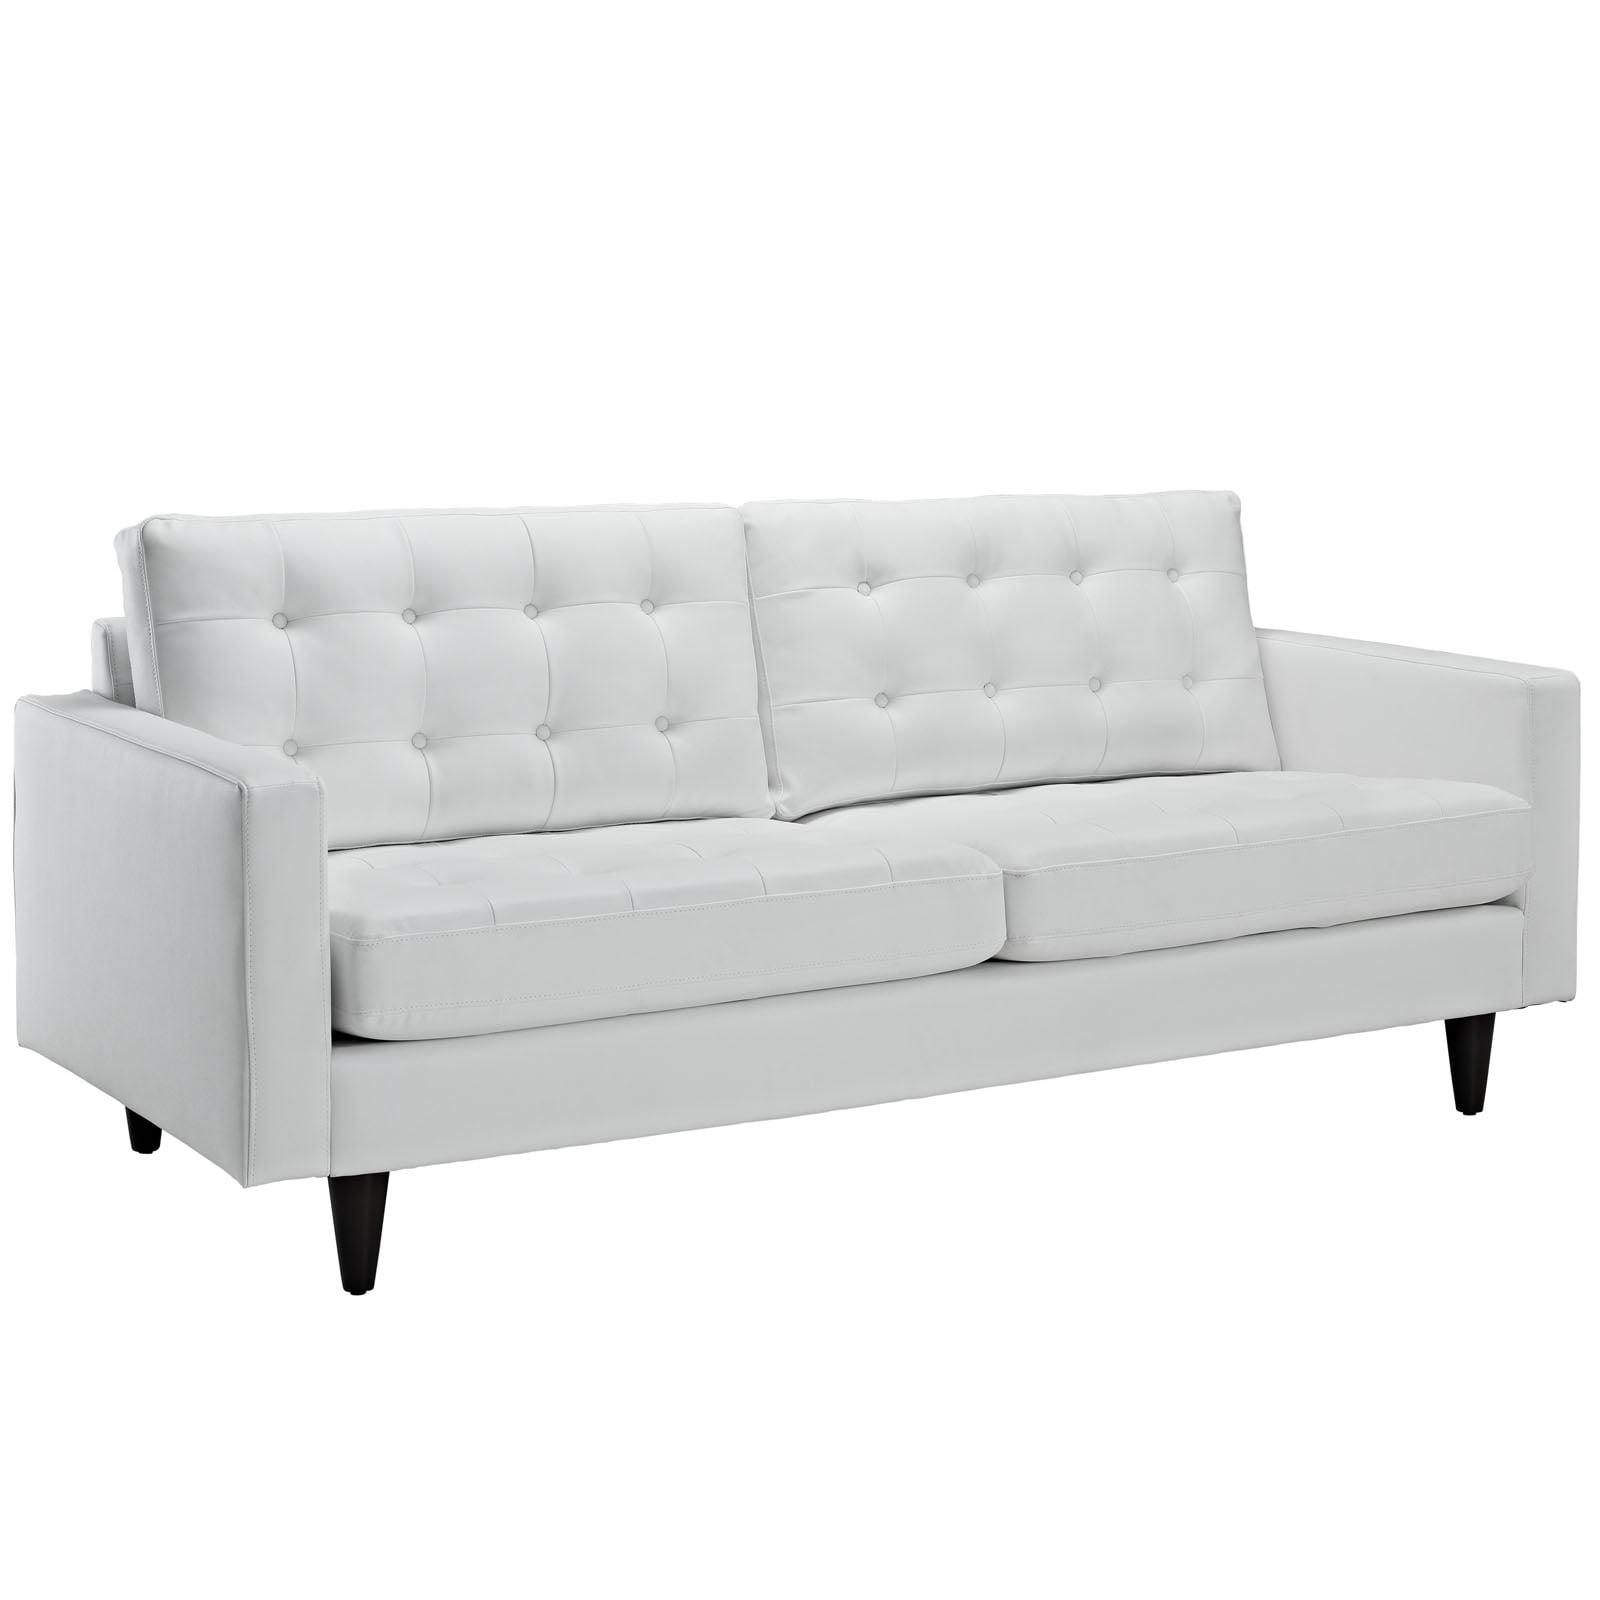 Modern Contemporary Living Room Leather, Modern White Leather Sofa Living Room